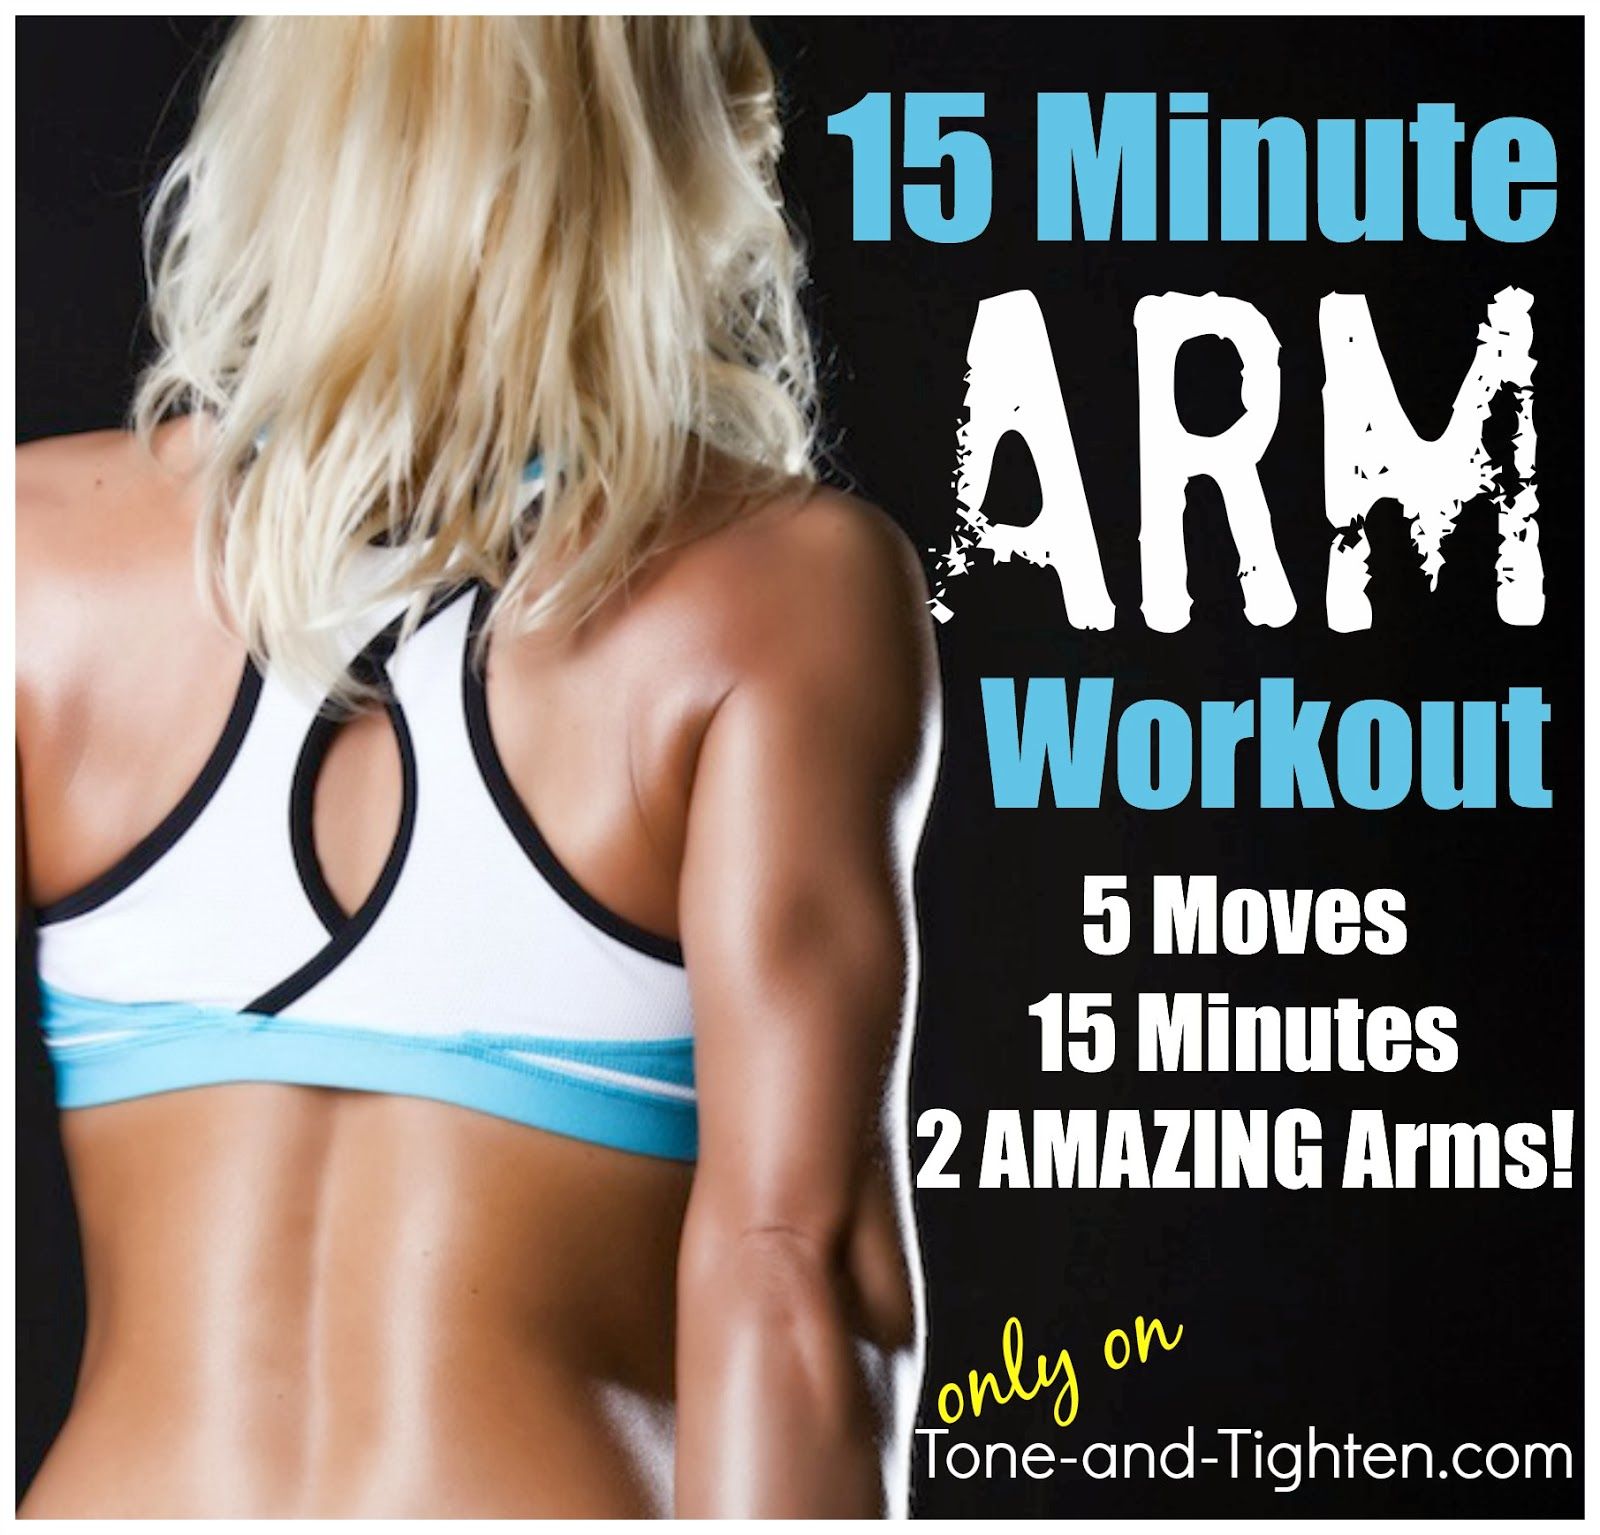 15 Minute At-Home Arm Workout – Sleek and sexy arms in no time! – Tone & Tighten